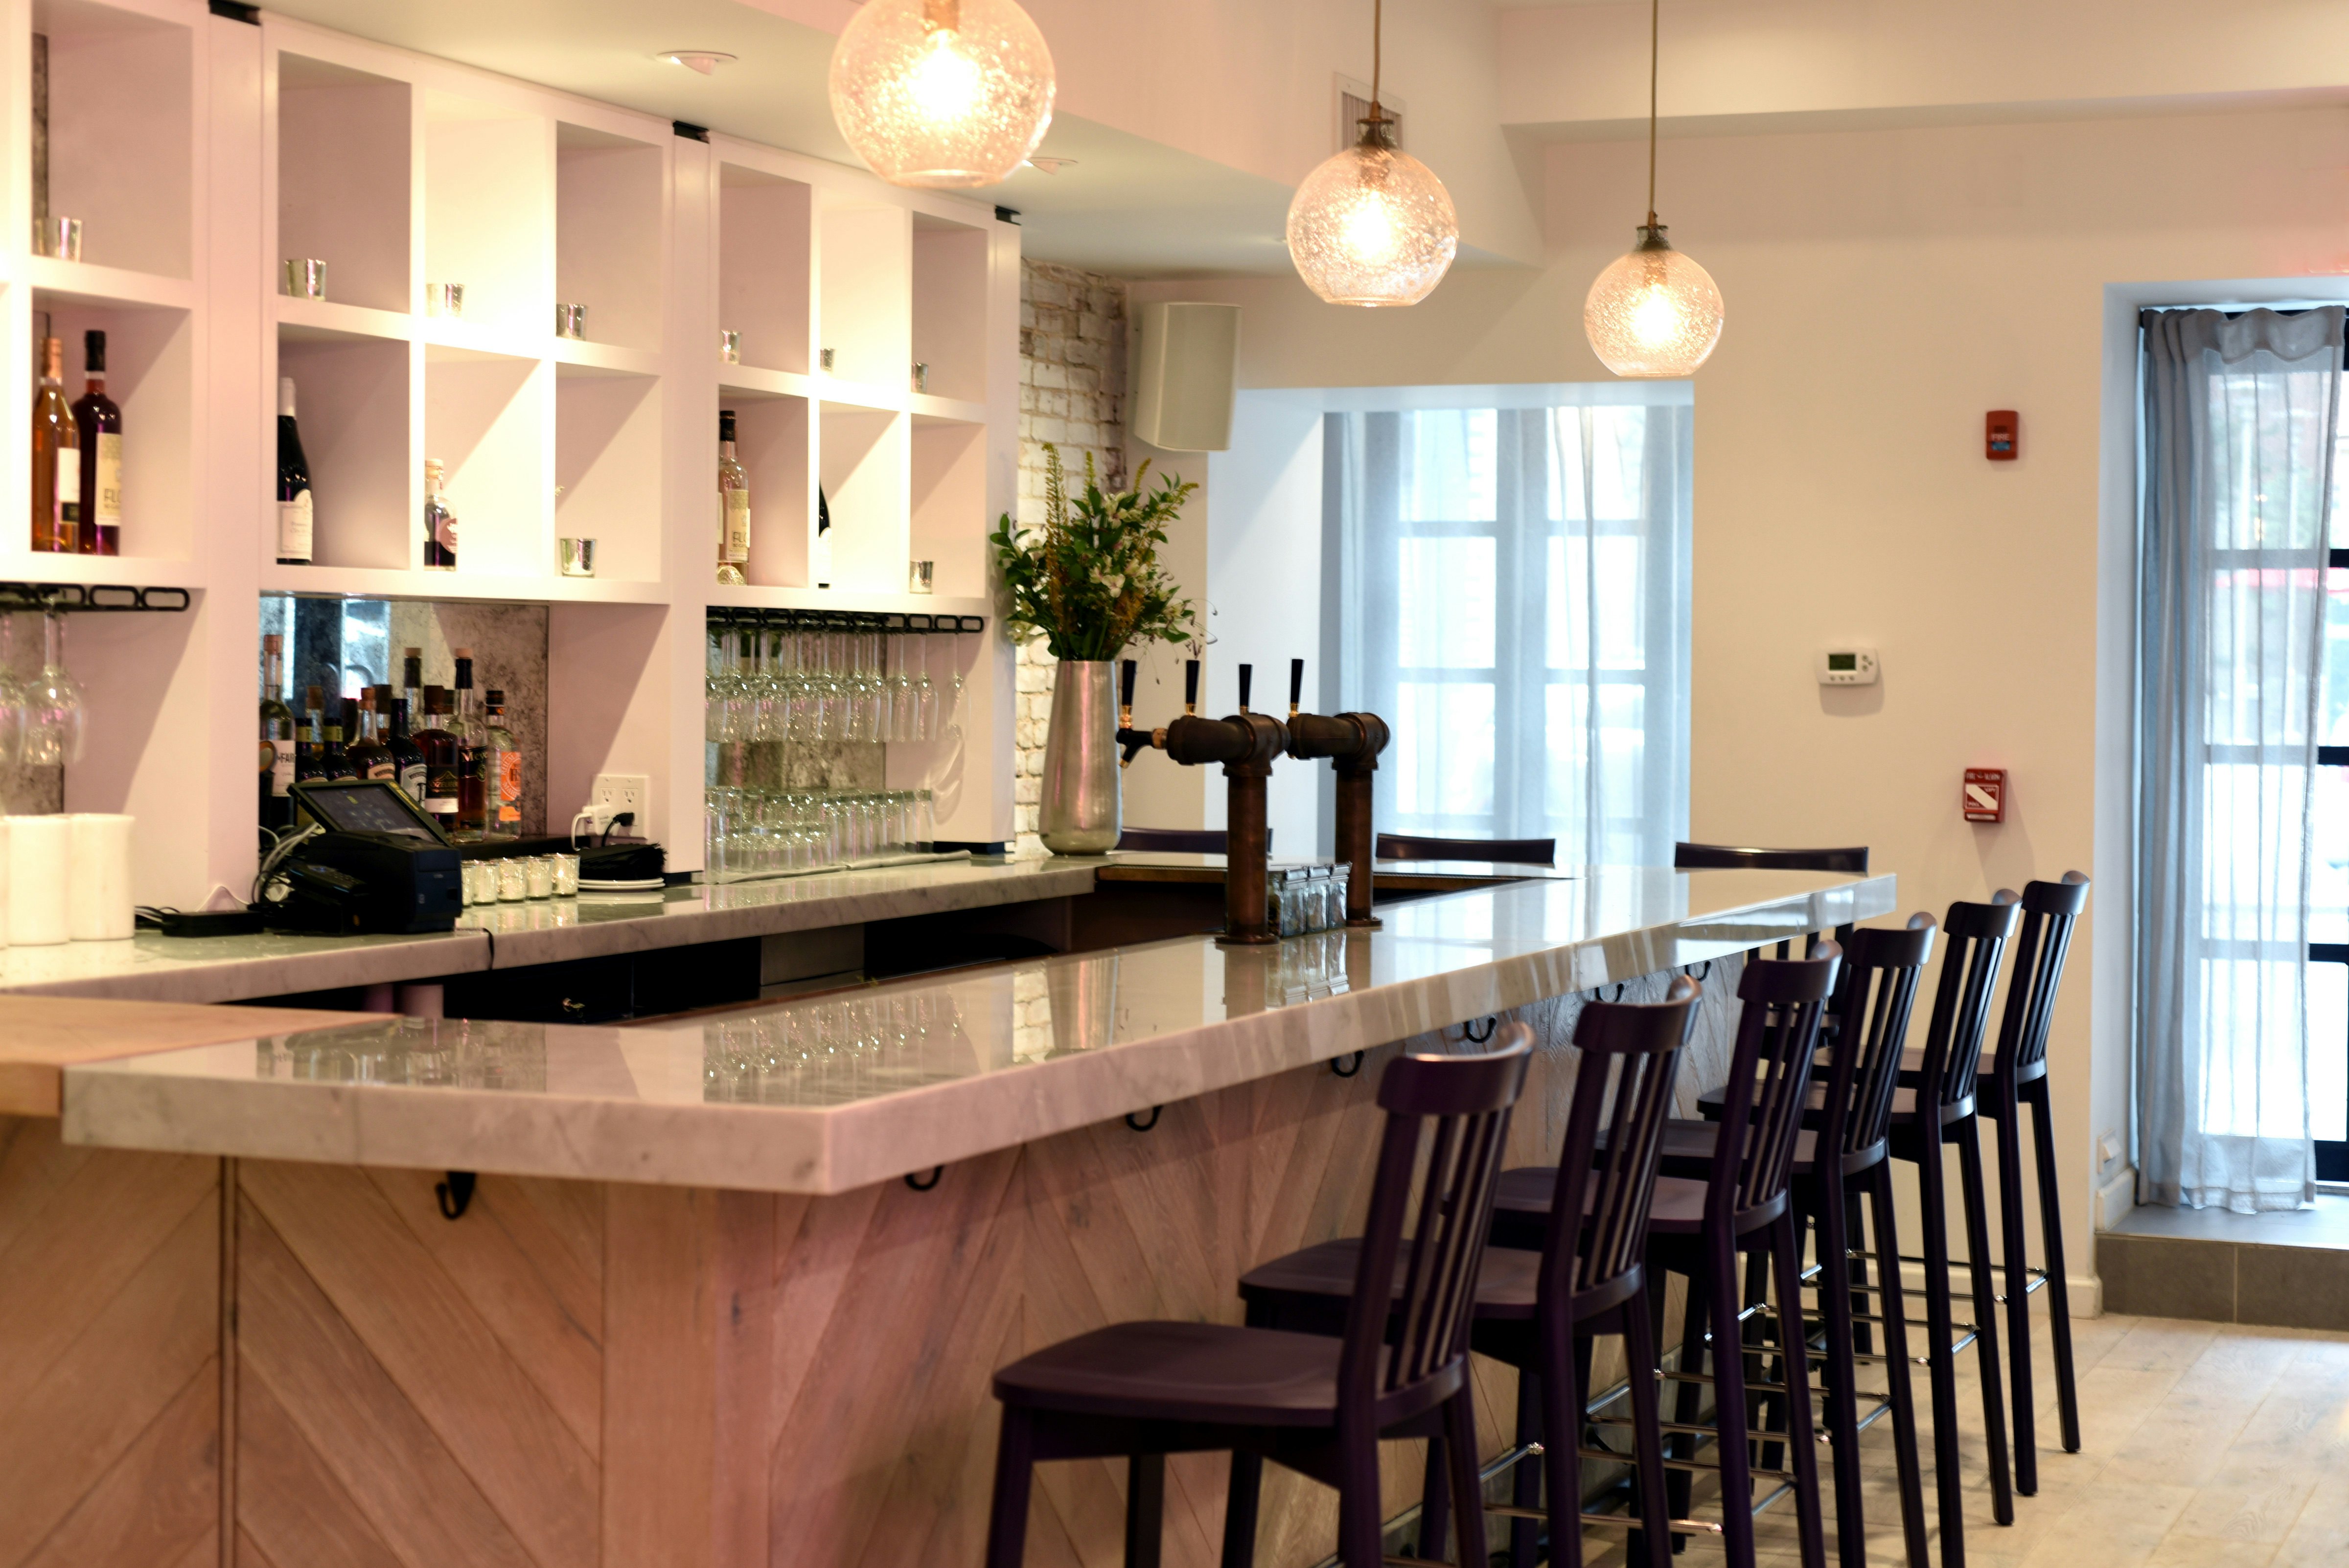 Enjoy a drink at the P.S. Kitchen bar 